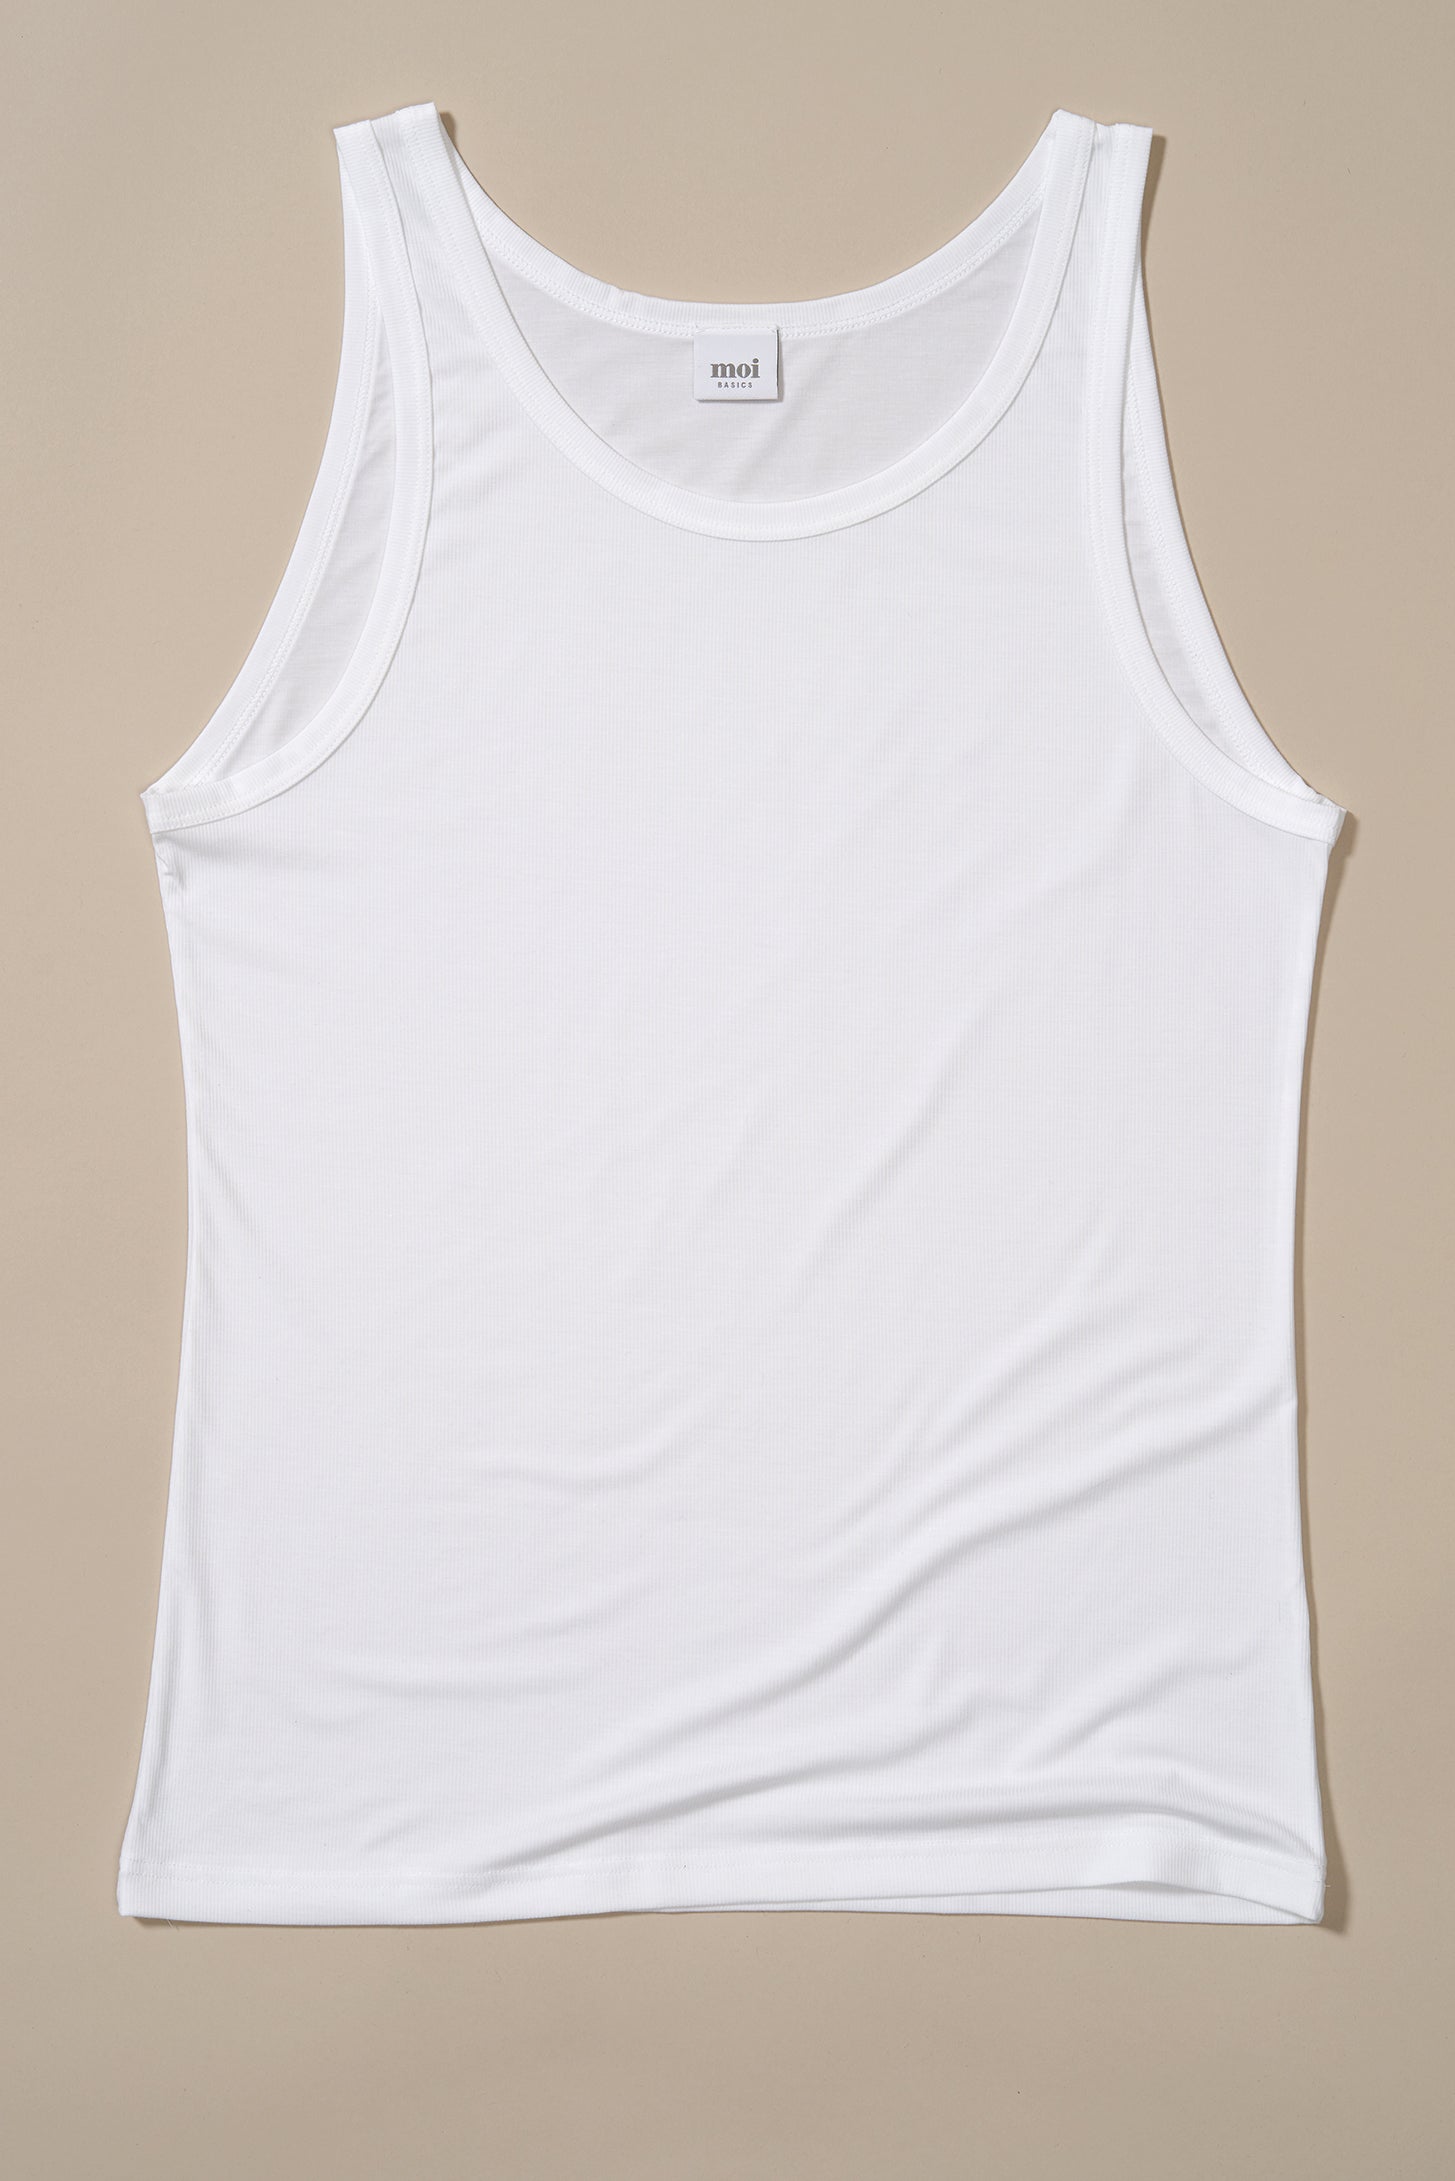 Gents tank top / undershirt in white made of natural MicroModal from moi-basics